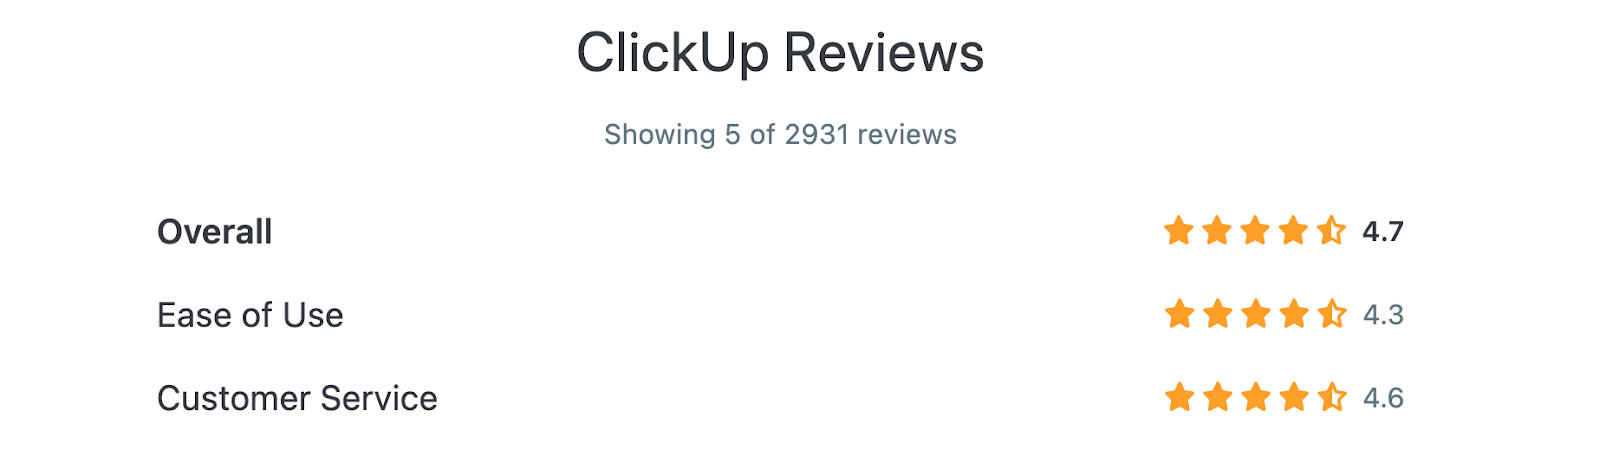 Clickup reviews on Capterra (Overall: 4.7, Ease of Use: 4.3, Customer Service: 4.6)